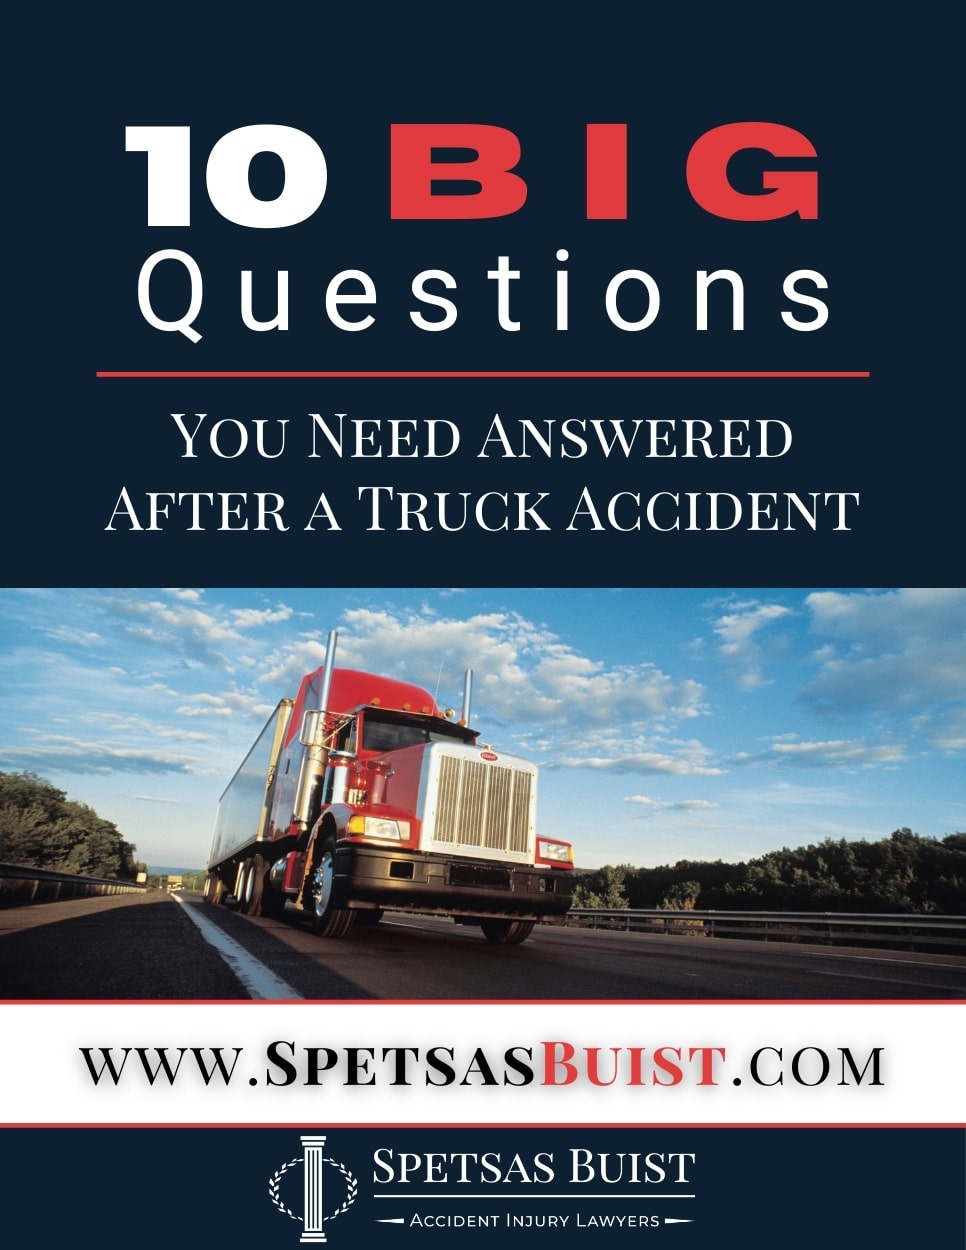 10 BIG Questions You Need Answered After a Truck Accident